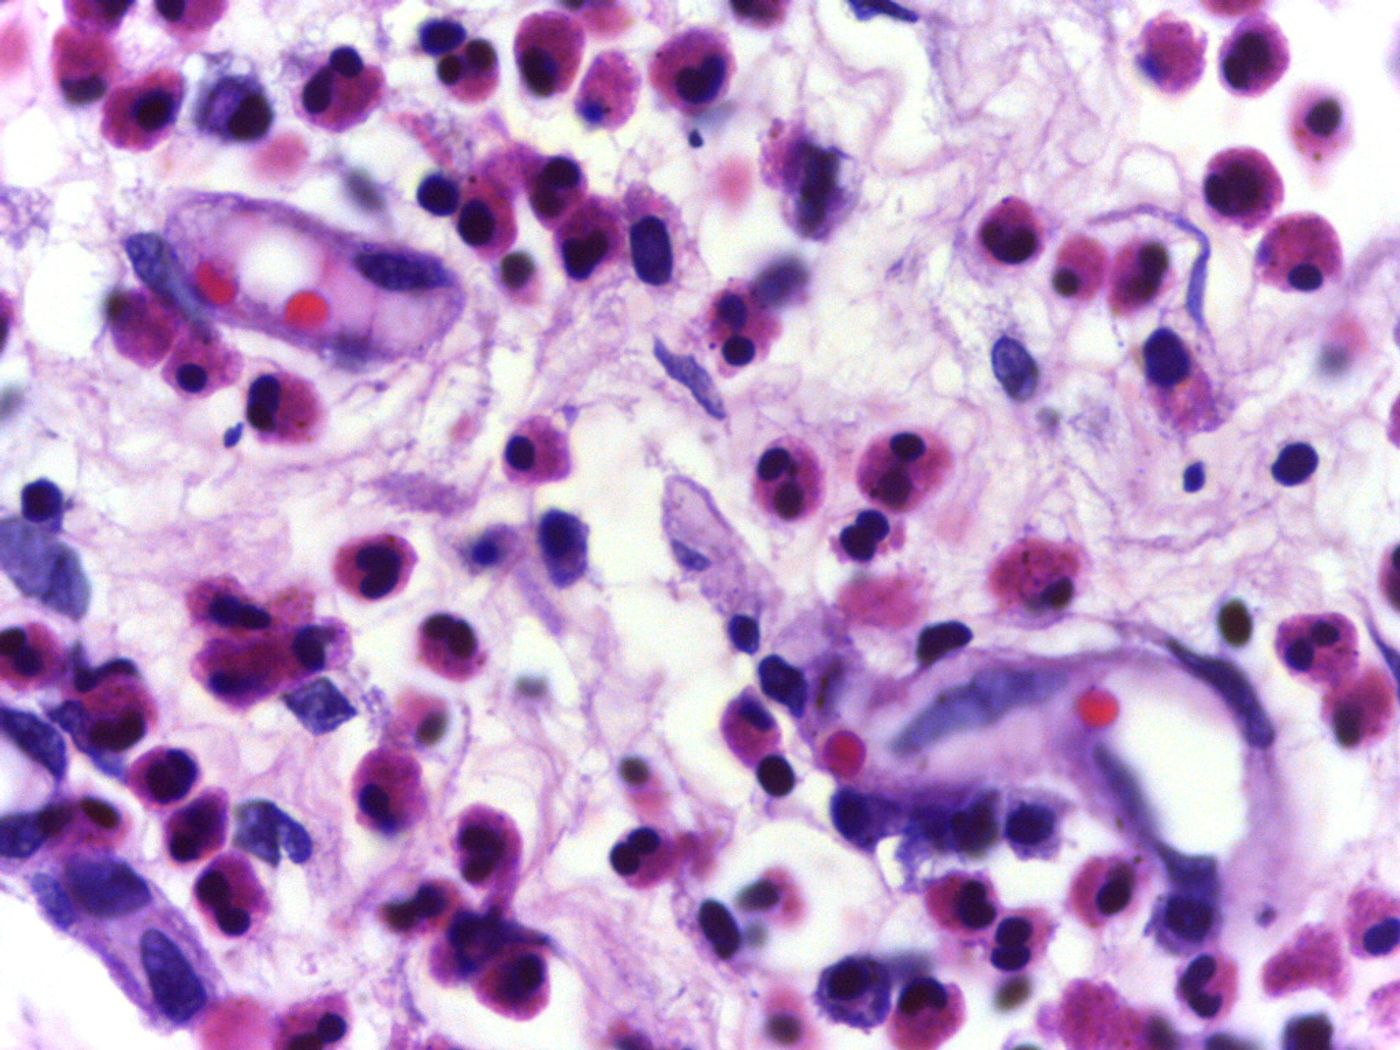 Micrograph showing high power view of Eosinophils. Credit: Department of Pathology, Calicut Medical College